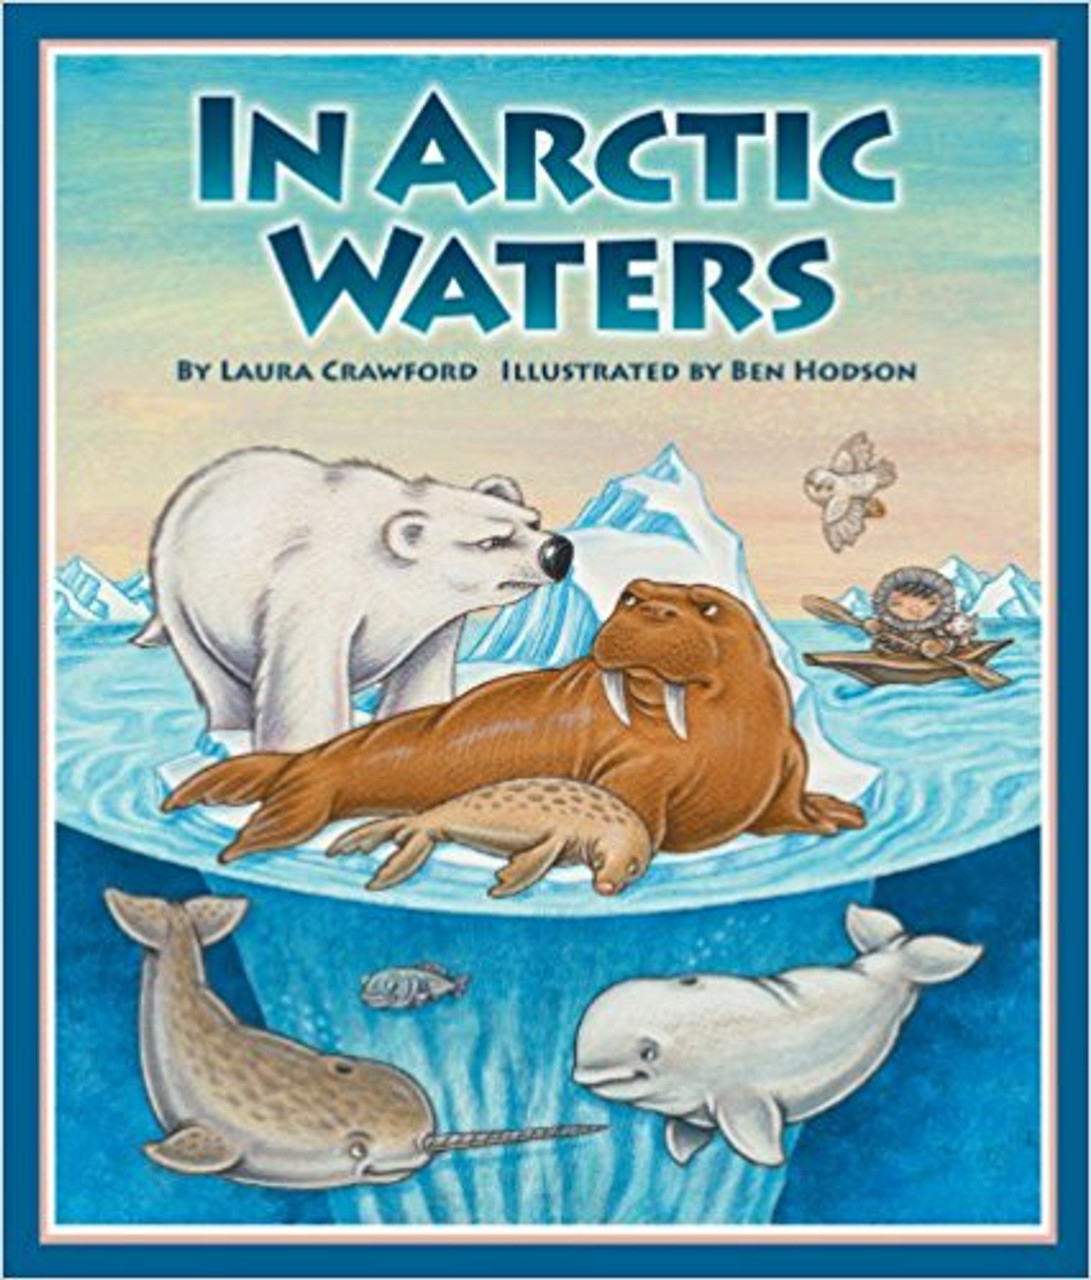 This arctic adaptation of This is the House that Jack Built follows polar bears, walruses, seals, narwhals, and beluga whales as they chase each other around the ice that floats in the Arctic waters.  Not only is the rhythmic, cumulative prose good for early readers, it is a pure delight to read aloud.  The For Creative Minds section helps children learn how these animals live in the cold, icy arctic region.